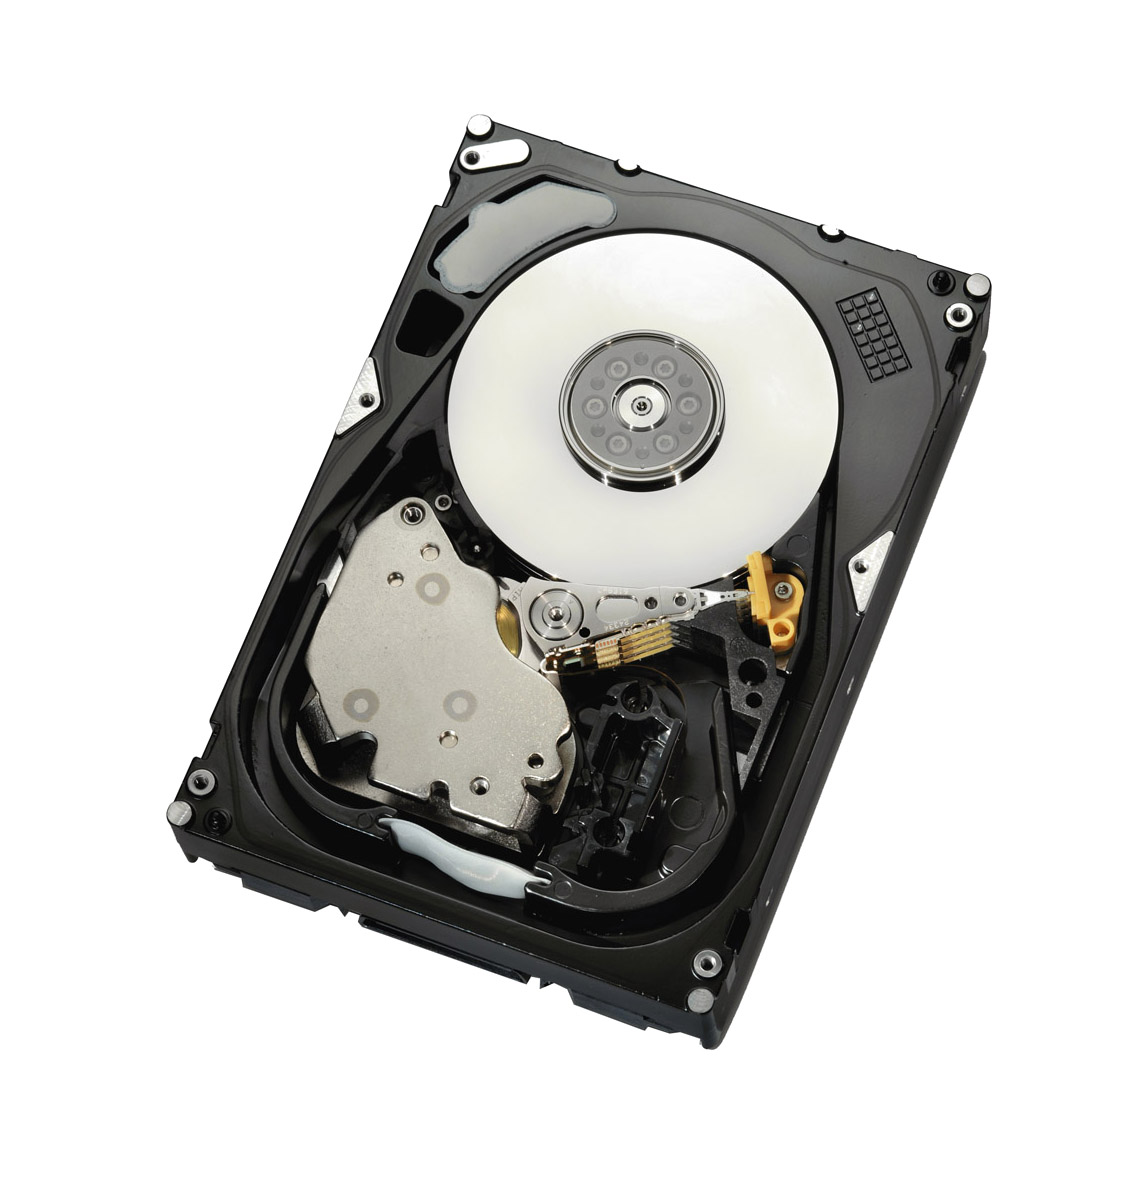 342-5298 Dell 4TB 7200RPM SAS 6Gbps Nearline Hot Swap 3.5-inch Internal Hard Drive with Tray for PowerEdger Servers